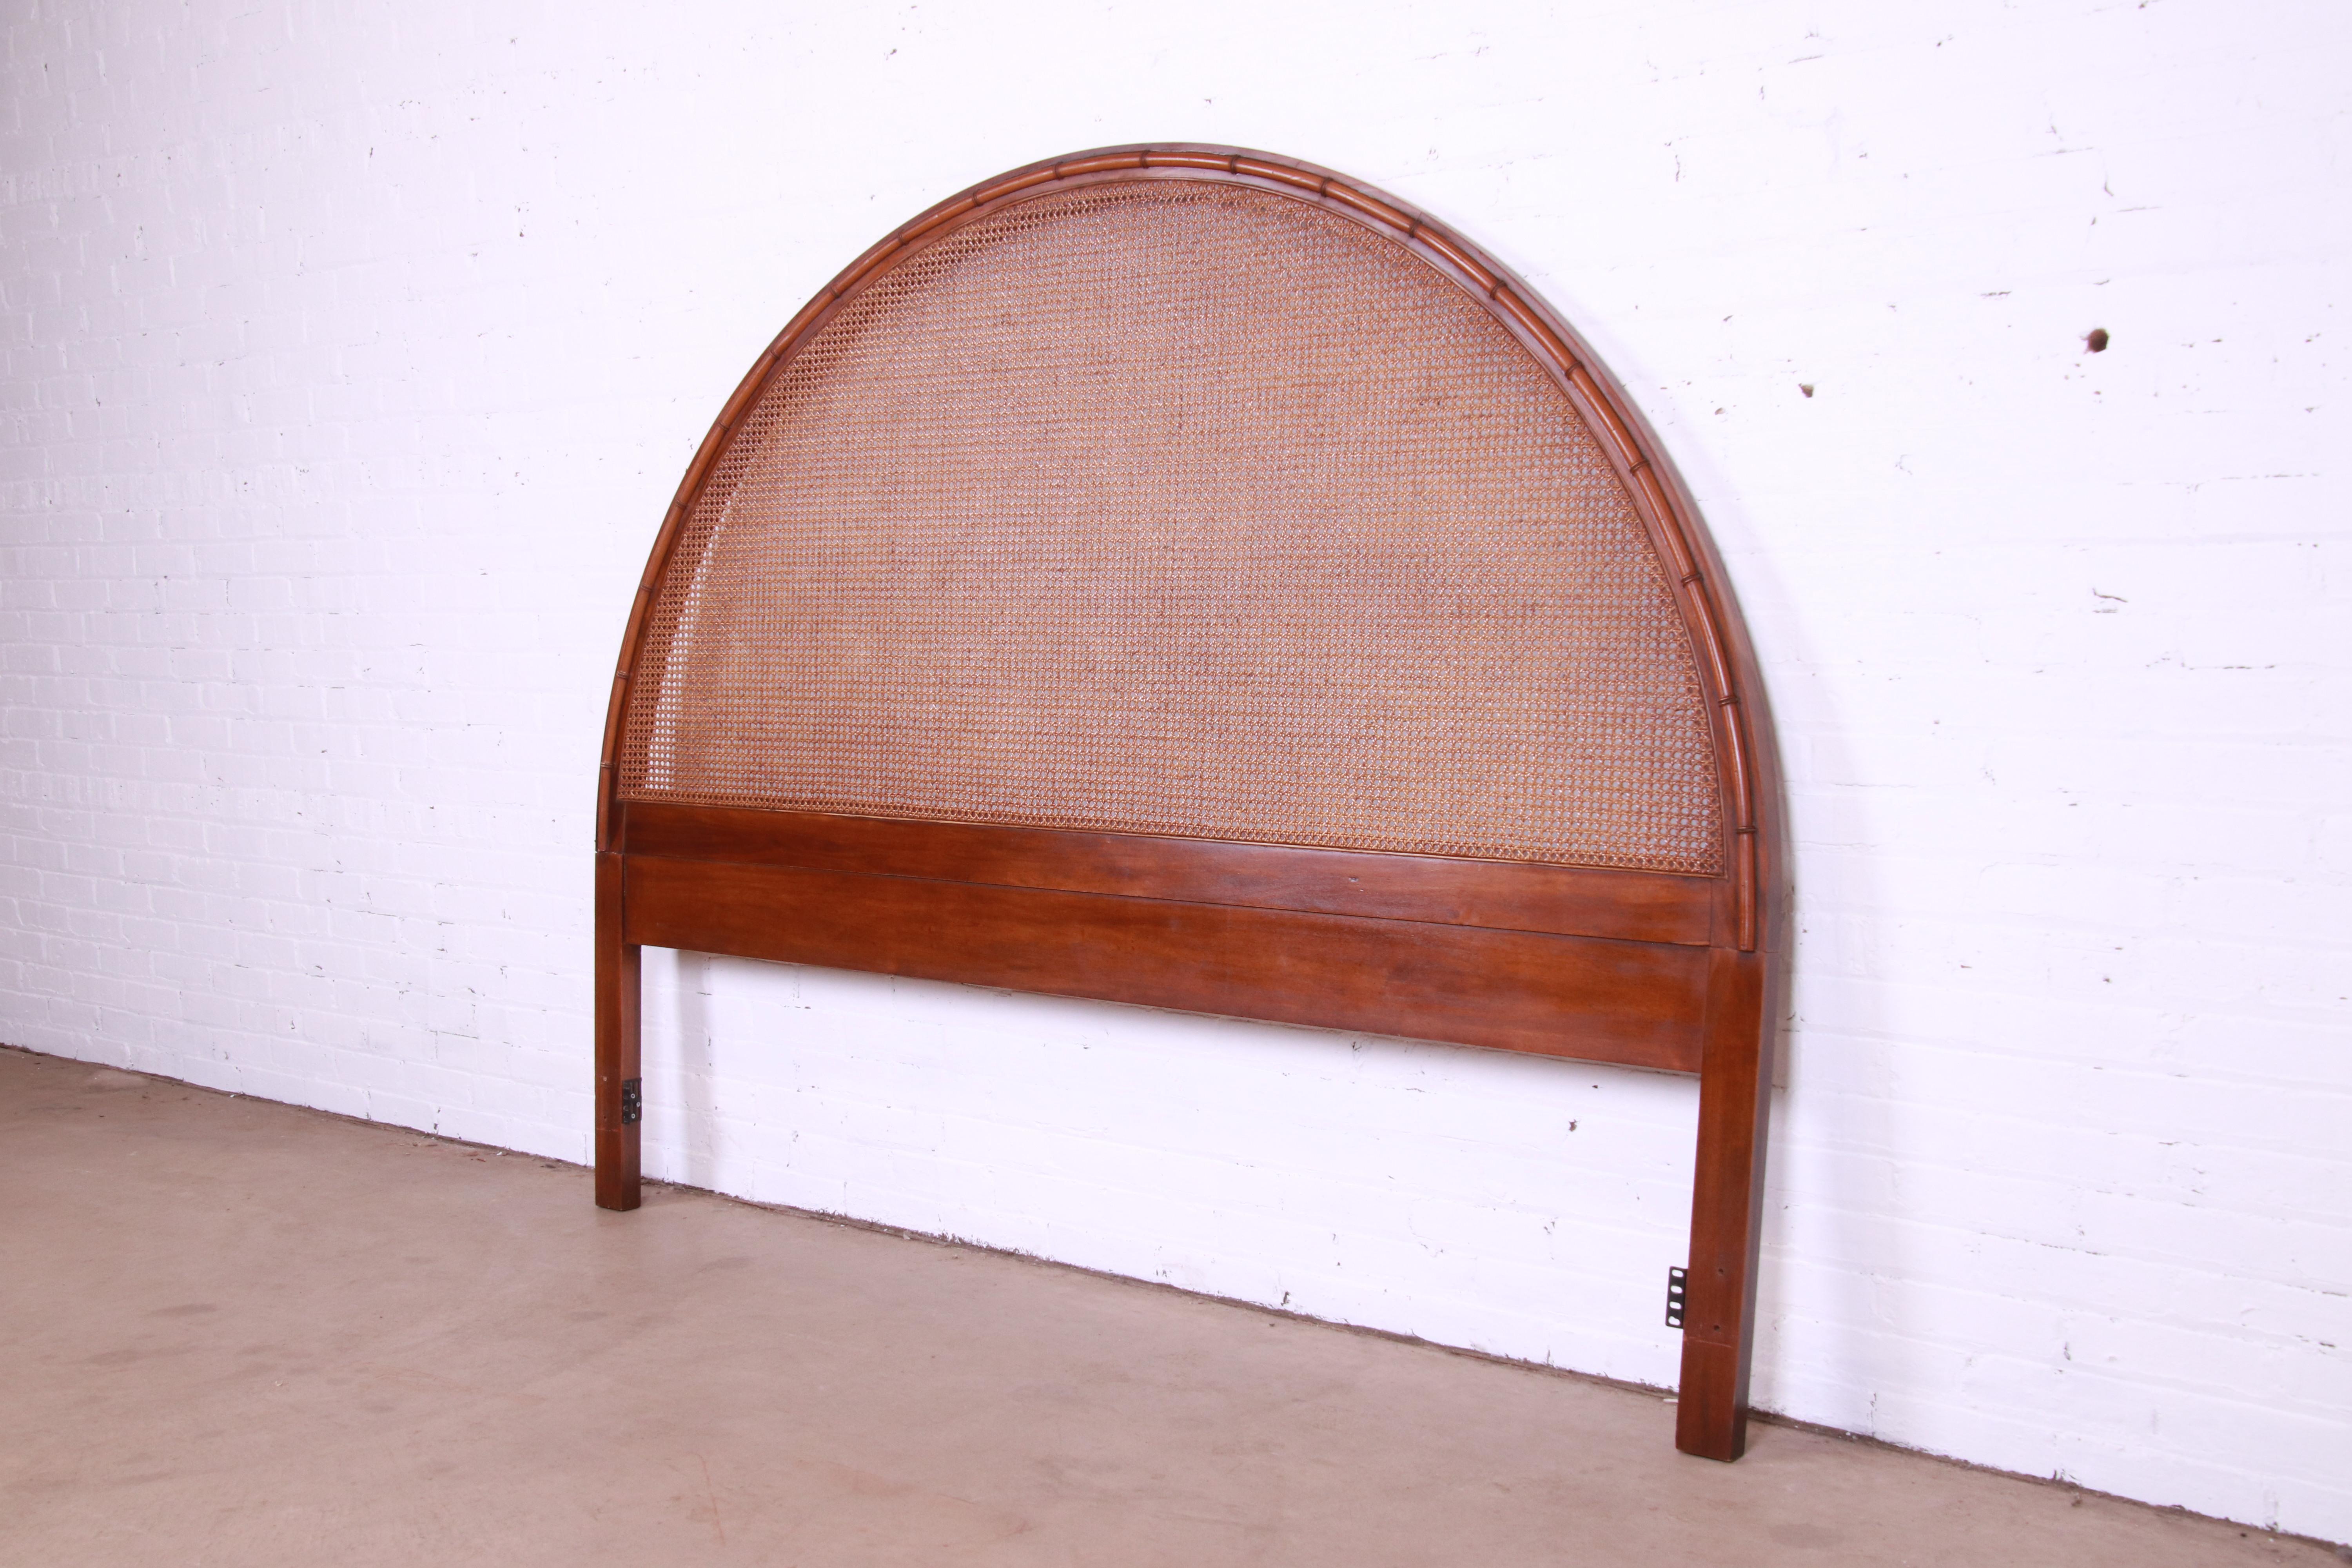 American Mid-Century Modern Walnut, Cane, and Faux Bamboo Arched King Headboard, 1960s